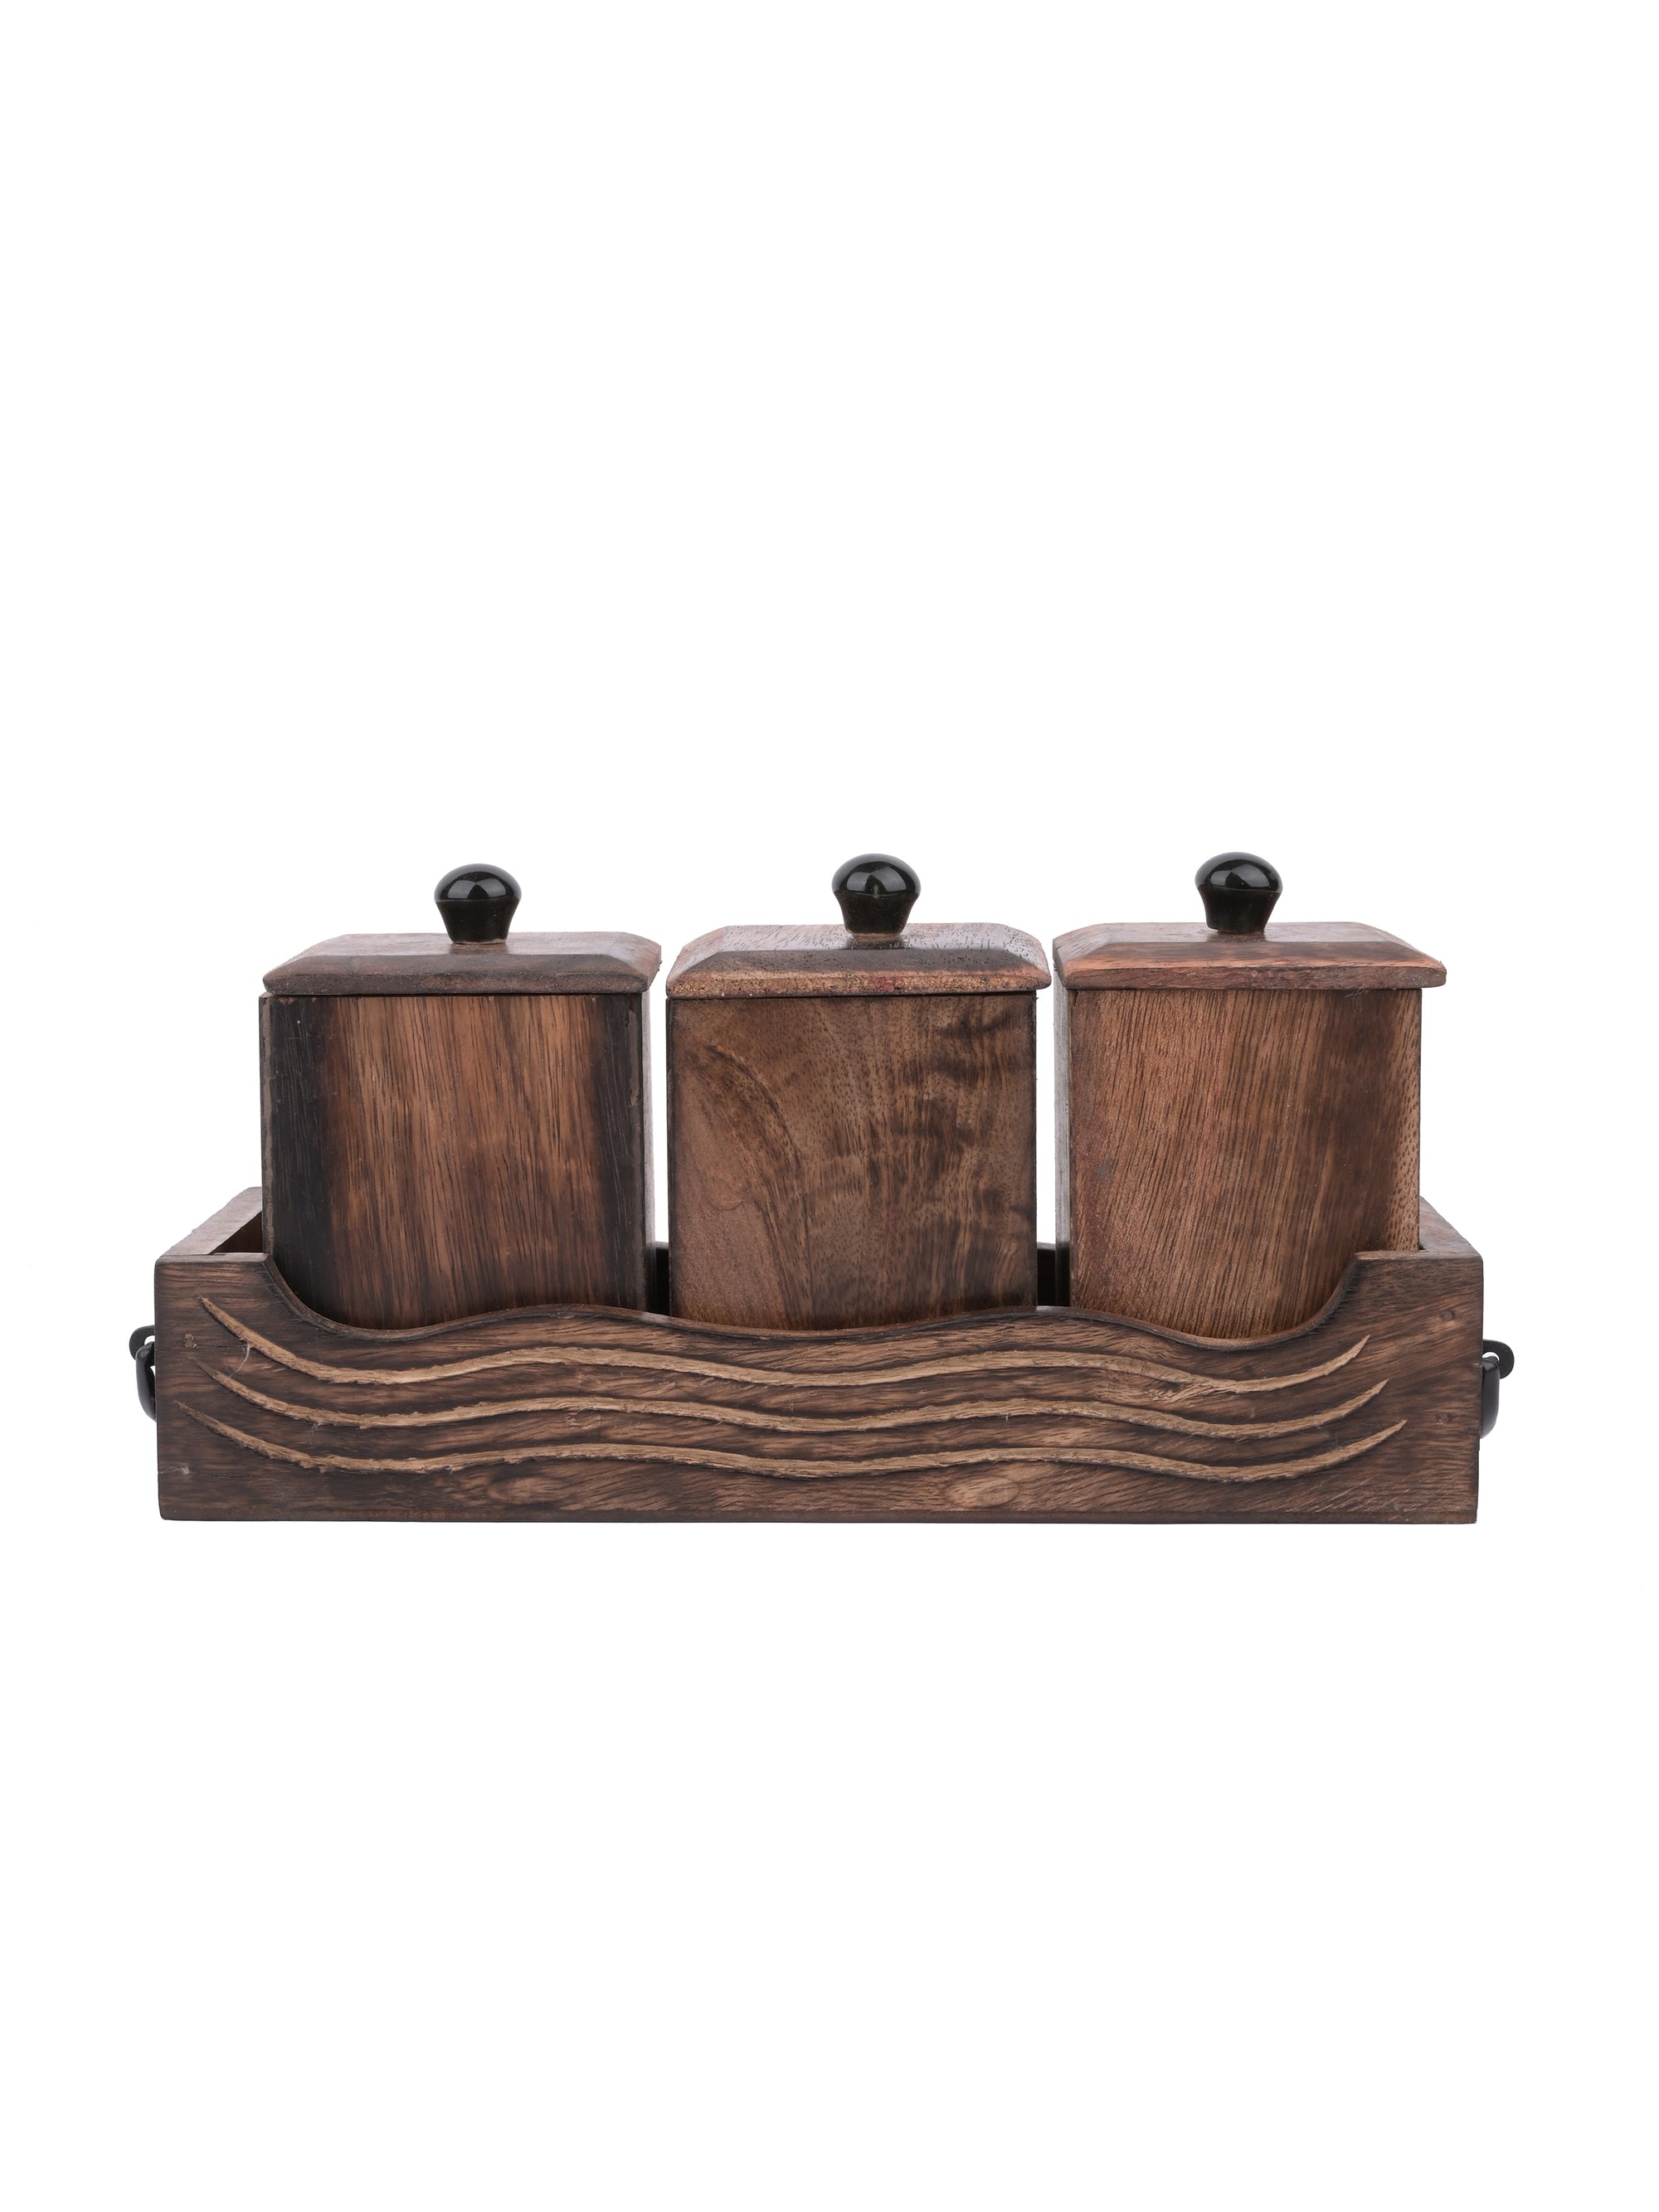 Wooden Container and stand set for Tea, Coffee and Sugar - The Heritage Artifacts